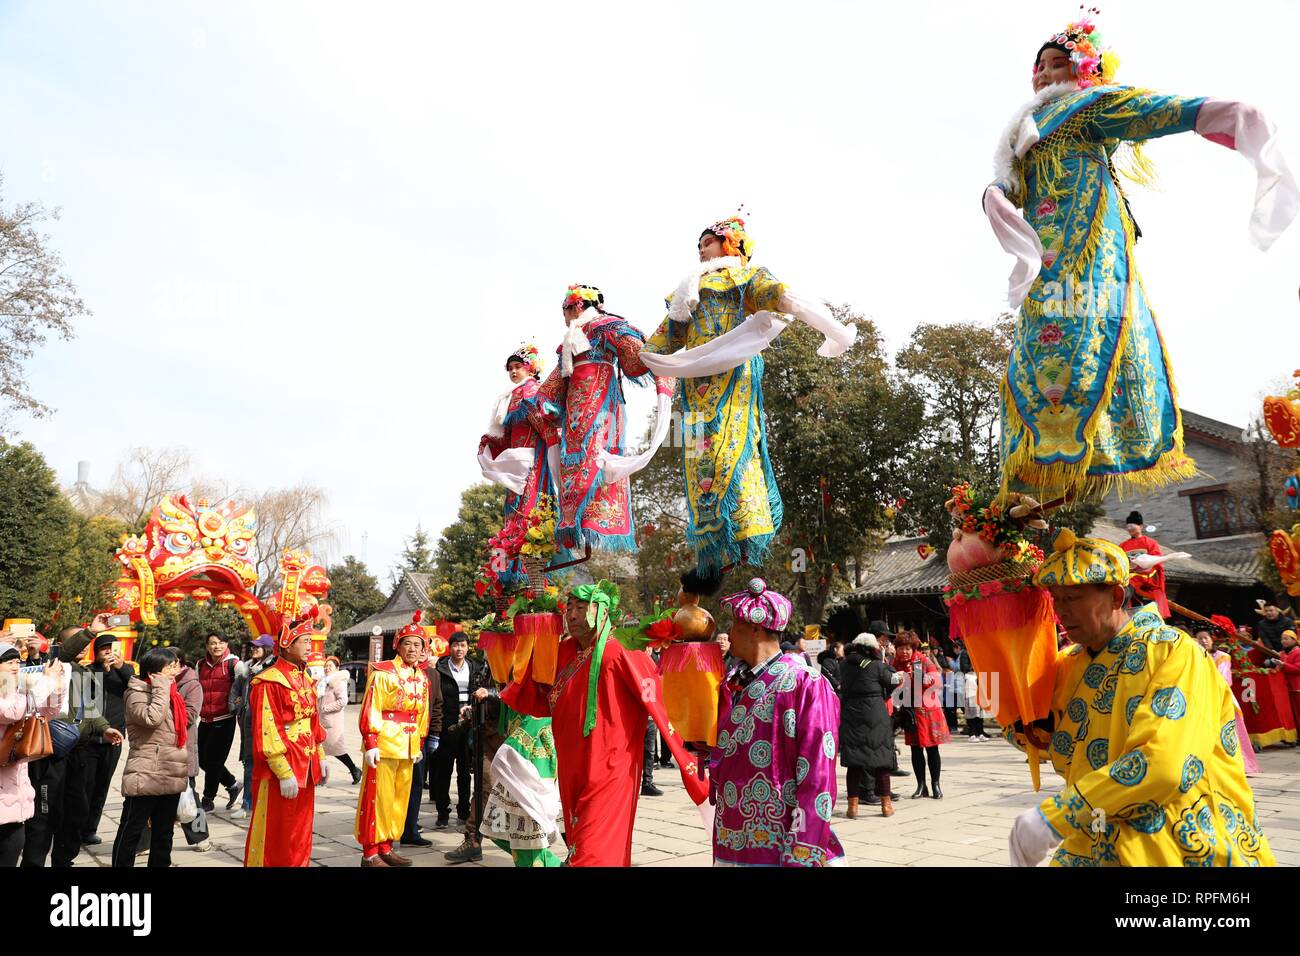 Zaozhuan, Zaozhuan, China. 22nd Feb, 2019. Zaozhuang, CHINA-Tourists enjoy the traditional performance during Spring Festival in TaiÃ¢â‚¬â„¢erzhuang, Zaozhuang, east ChinaÃ¢â‚¬â„¢s Shandong Province. The performers standing on the stilts attrat many peopleÃ¢â‚¬â„¢s attention. Credit: SIPA Asia/ZUMA Wire/Alamy Live News Stock Photo